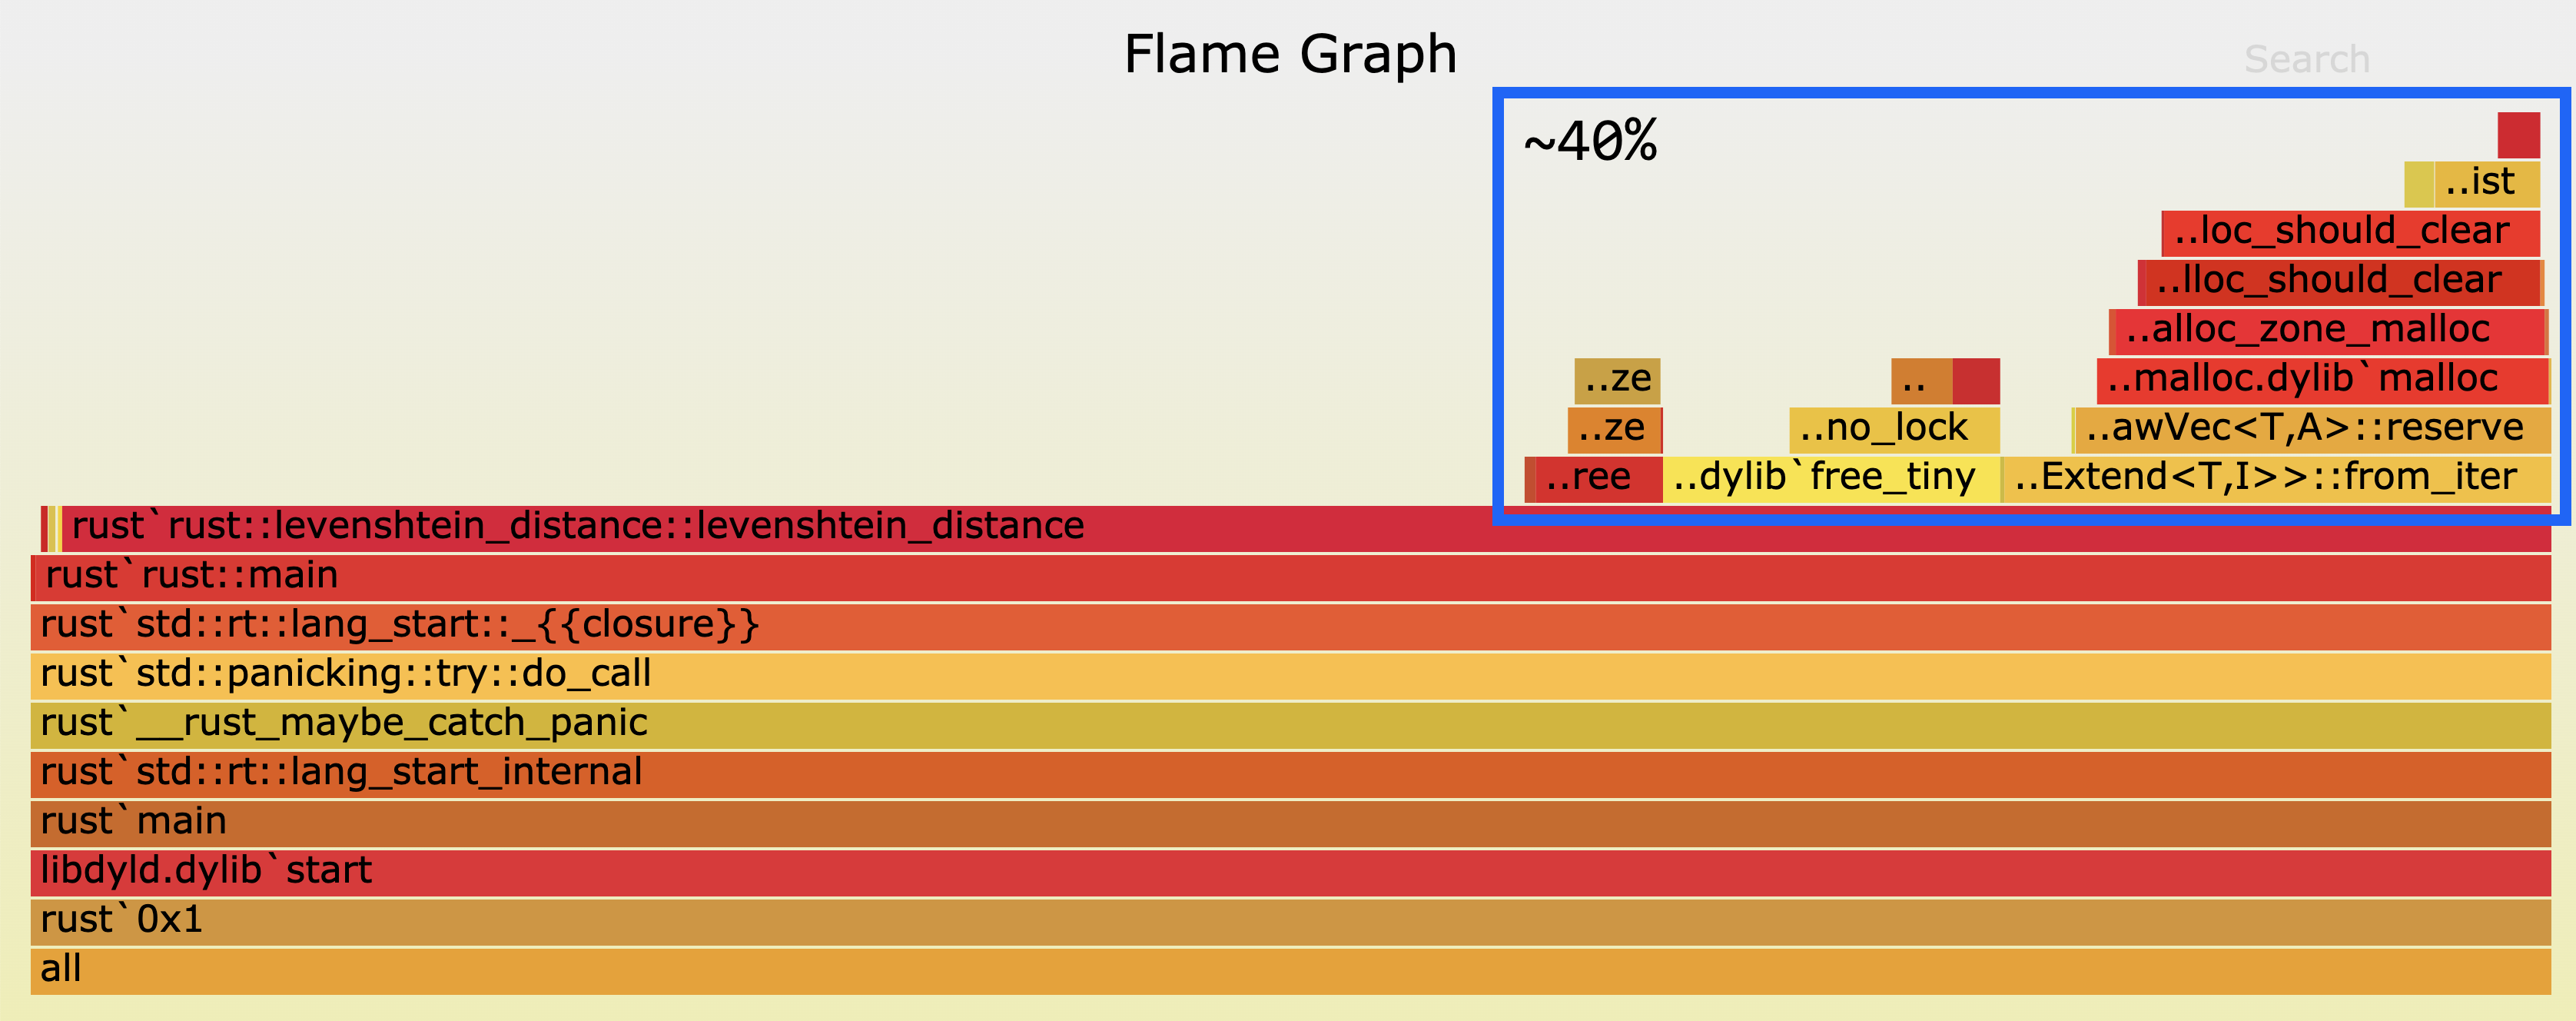 Flamegraph before, with system allocator. Roughly 40% of execution time spent allocating